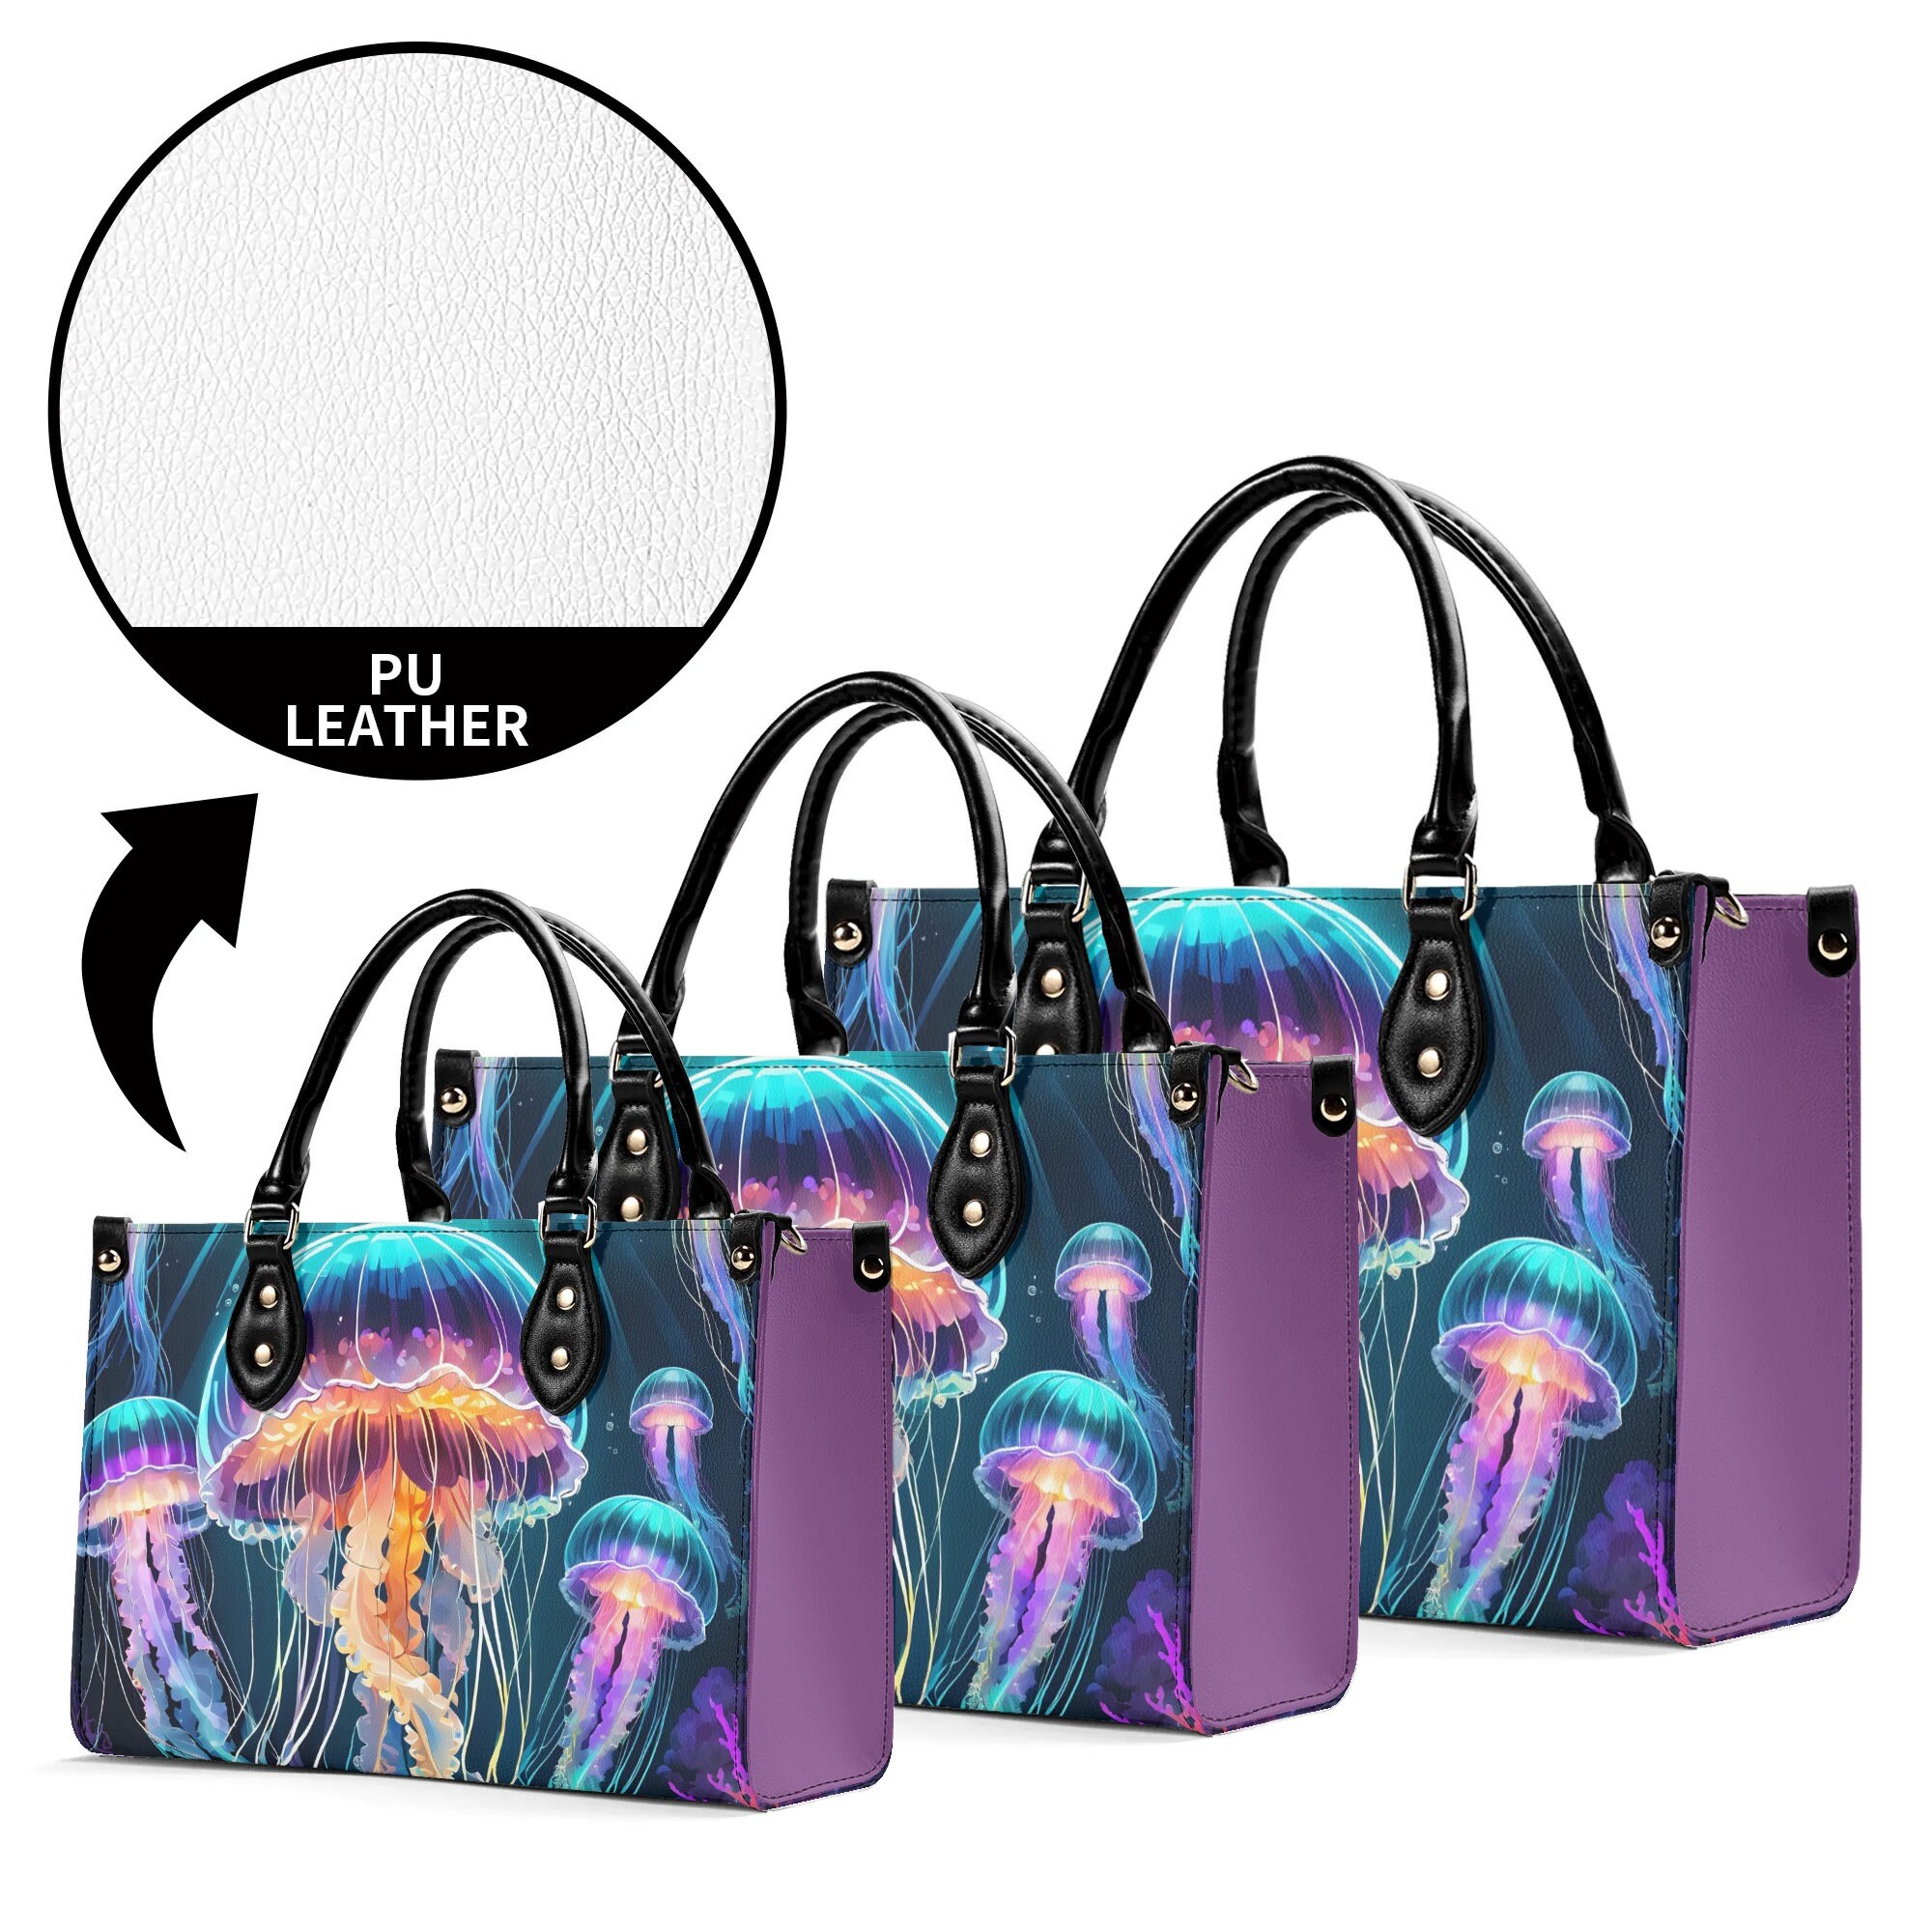 Jellyfish Leather Bags, Animal lover Gift